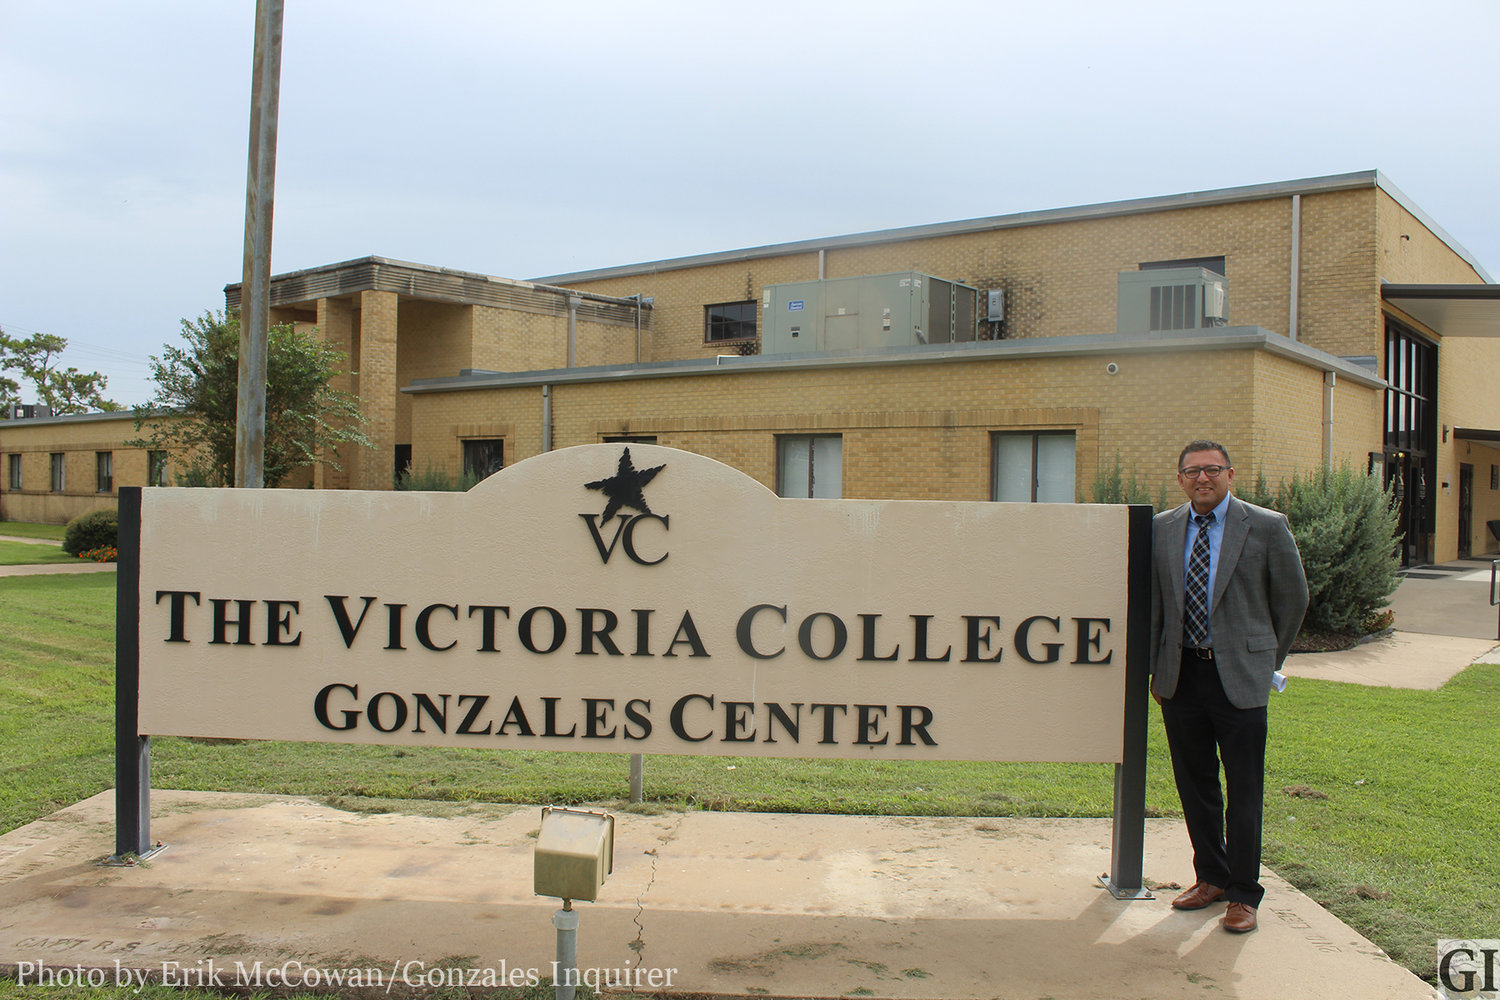 Since 2007, Victoria College’s presence in Gonzales has helped many citizens and area businesses. Manager Vince Ortiz stands proudly in front of the Gonzales Center marker on Monday afternoon.